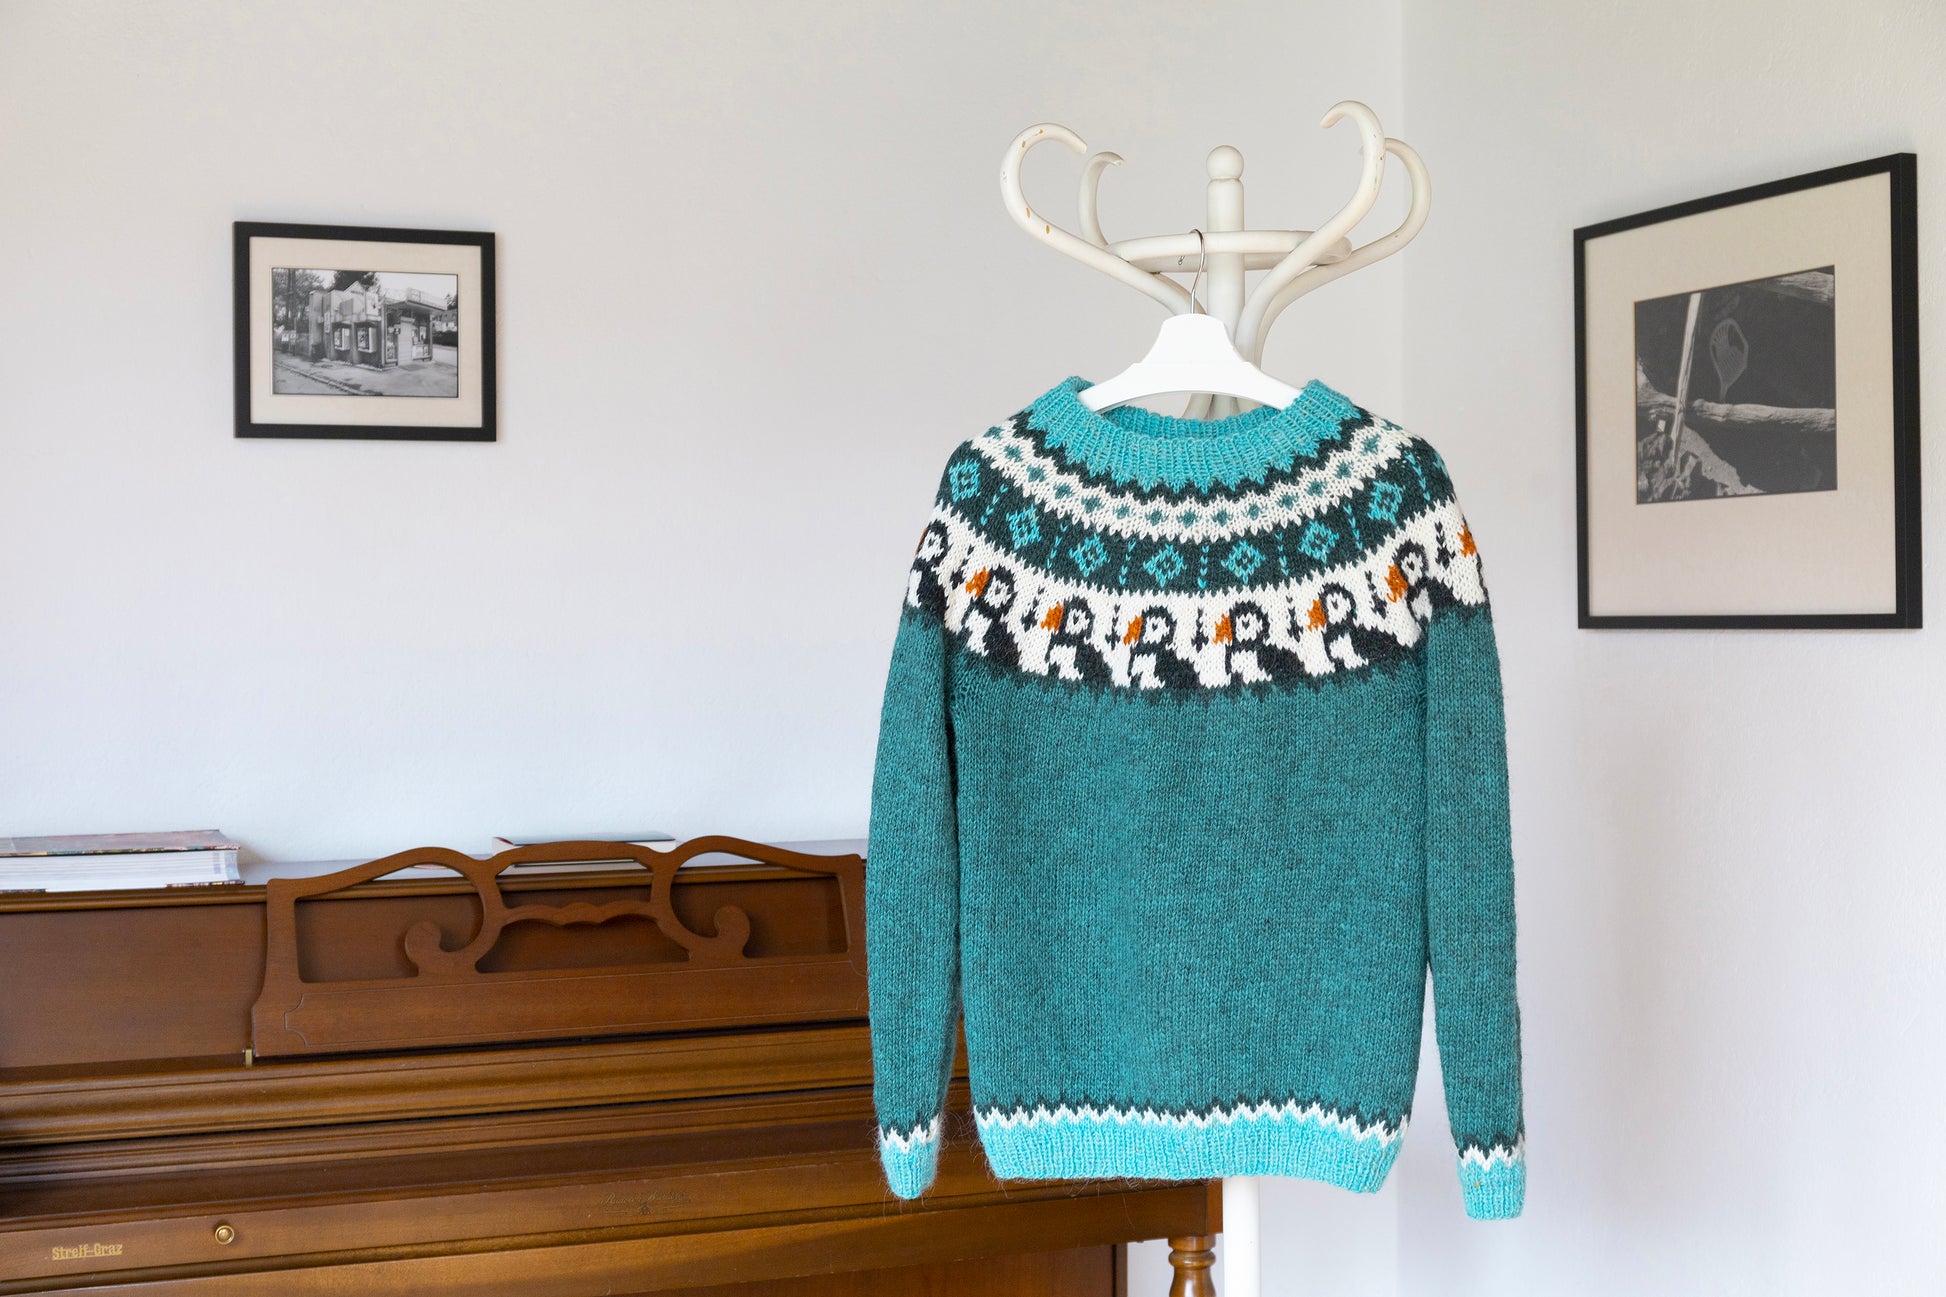 Turquoise and white knitted Icelandic lopapeysa sweater in Puffins knitting pattern in interior